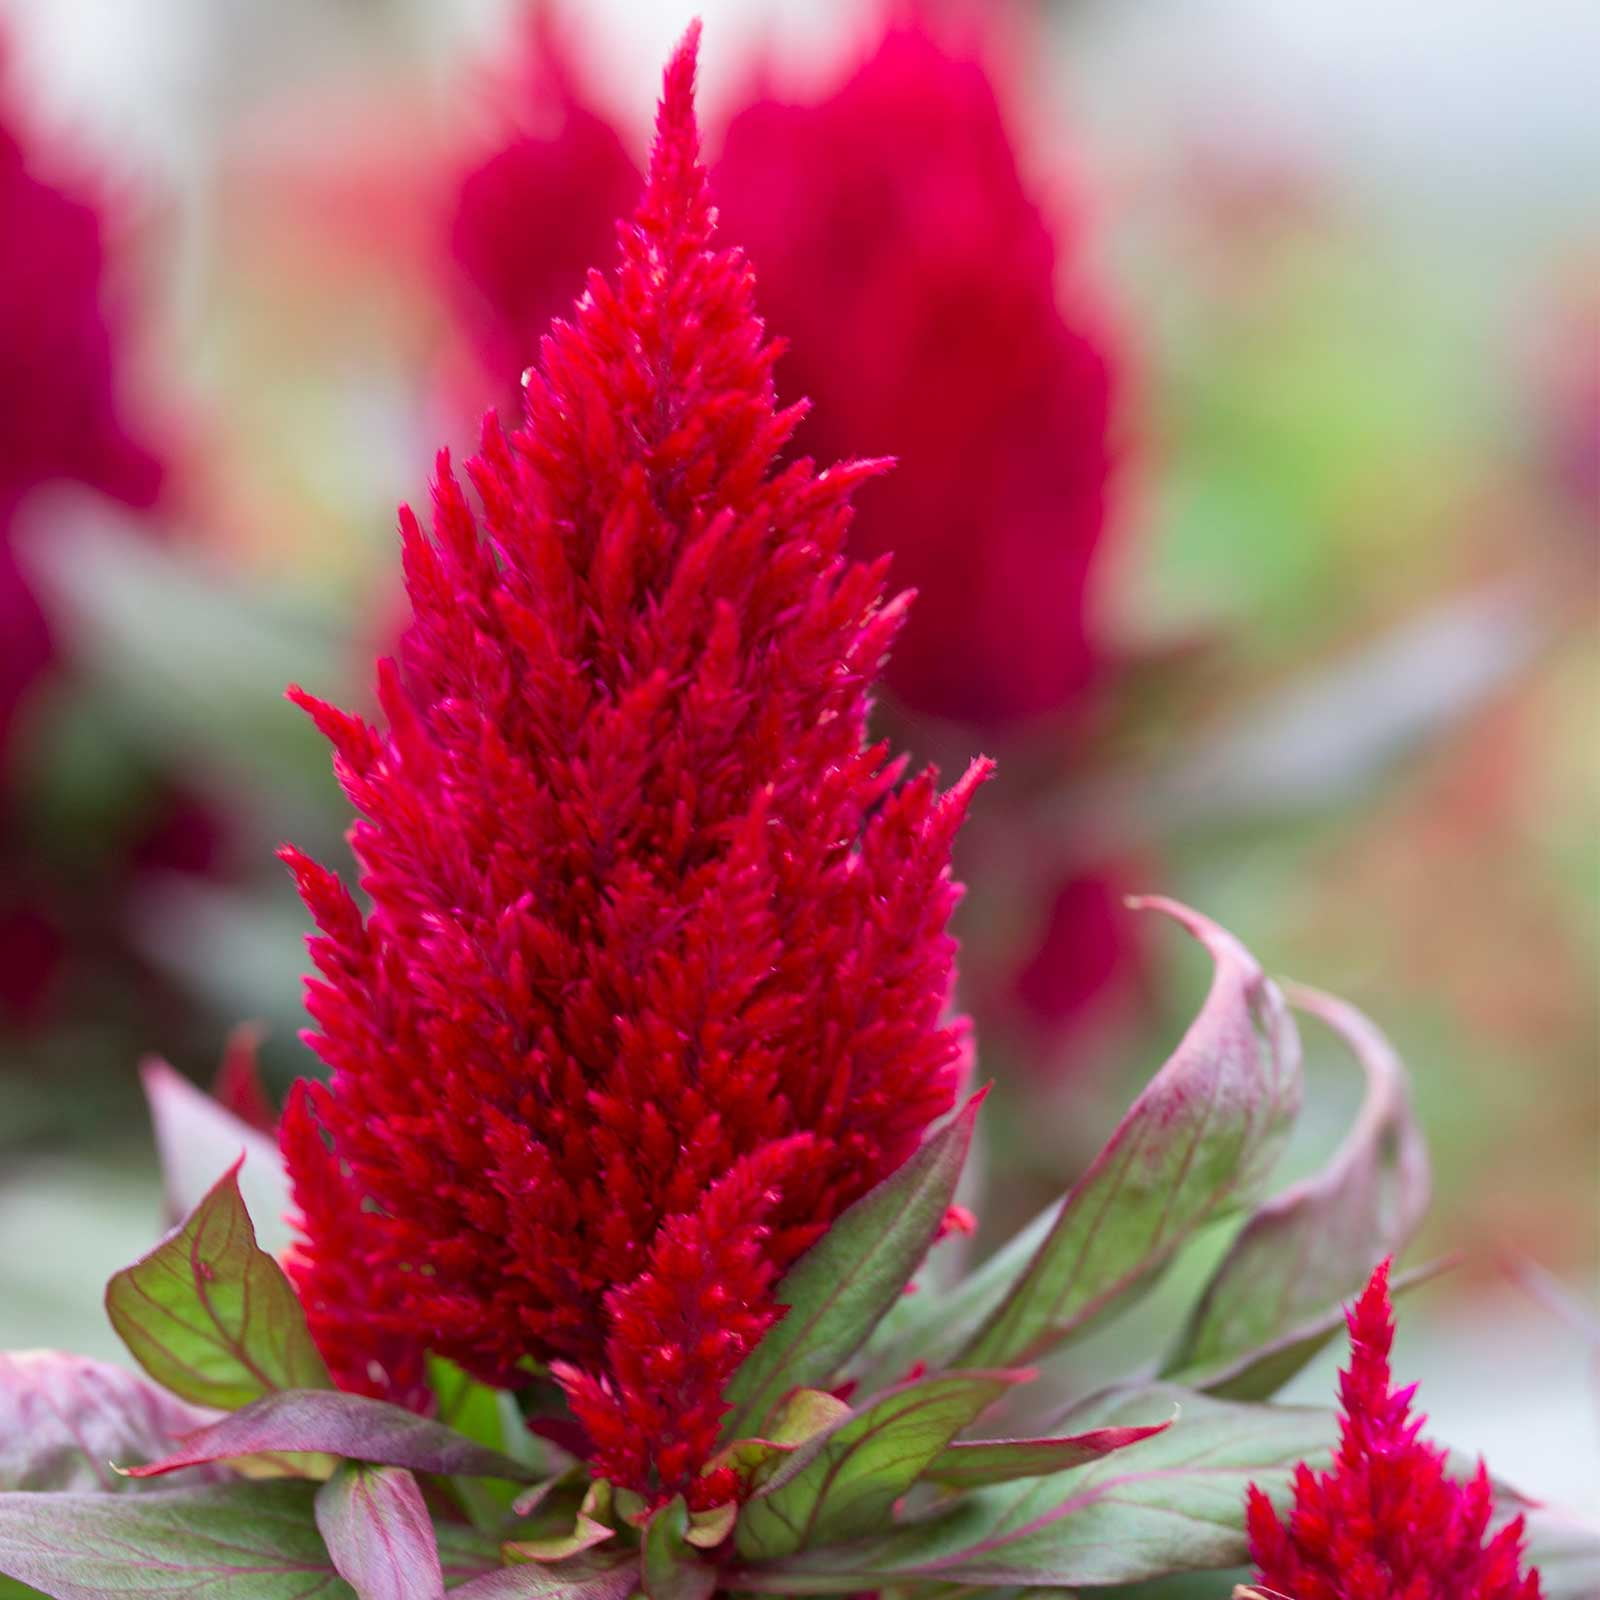 new-look-plumed-celosia-seeds-1000-seeds-scarlet-red-annual-flower